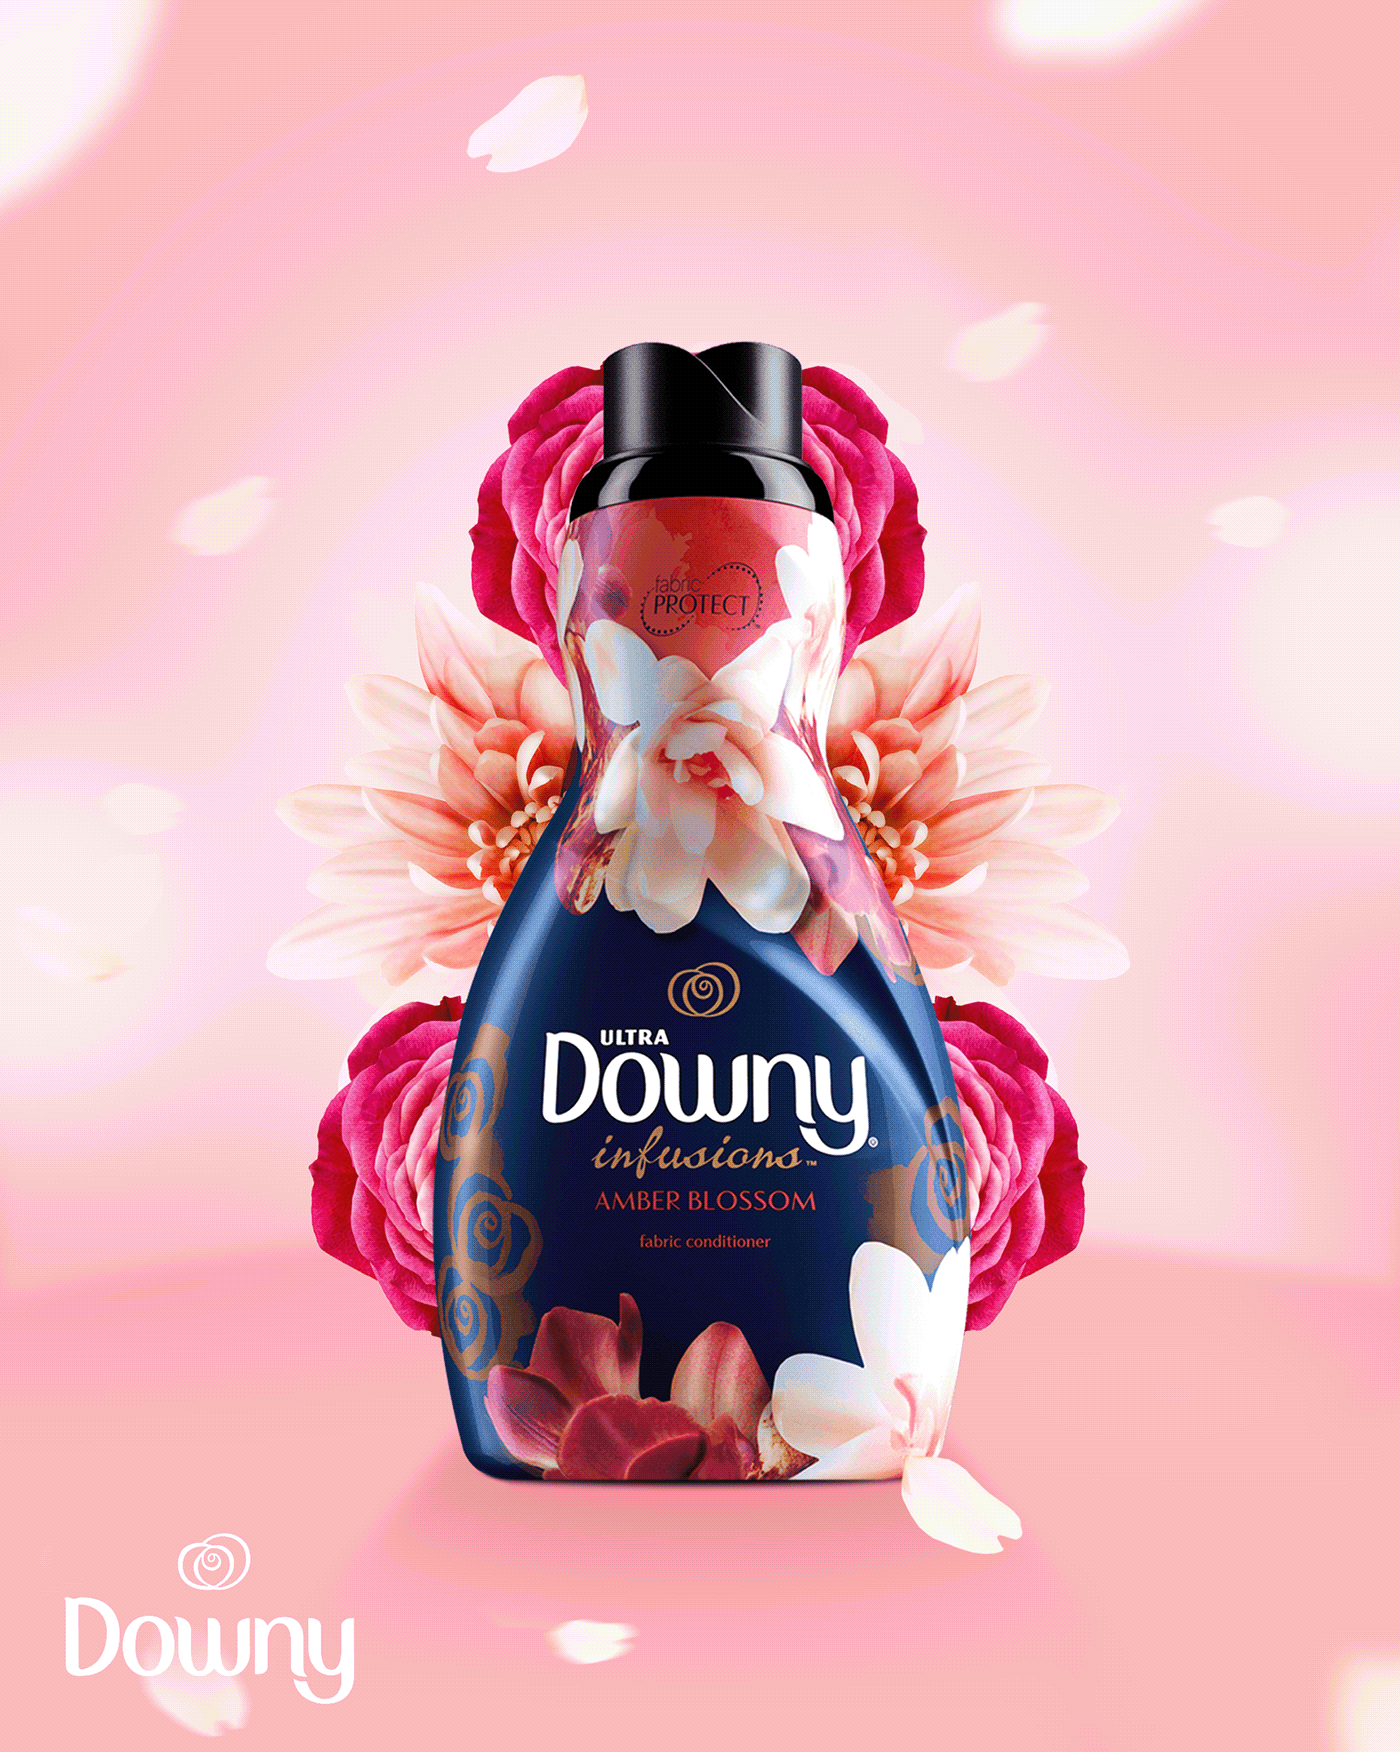 ads Advertising  campaign Downy poster